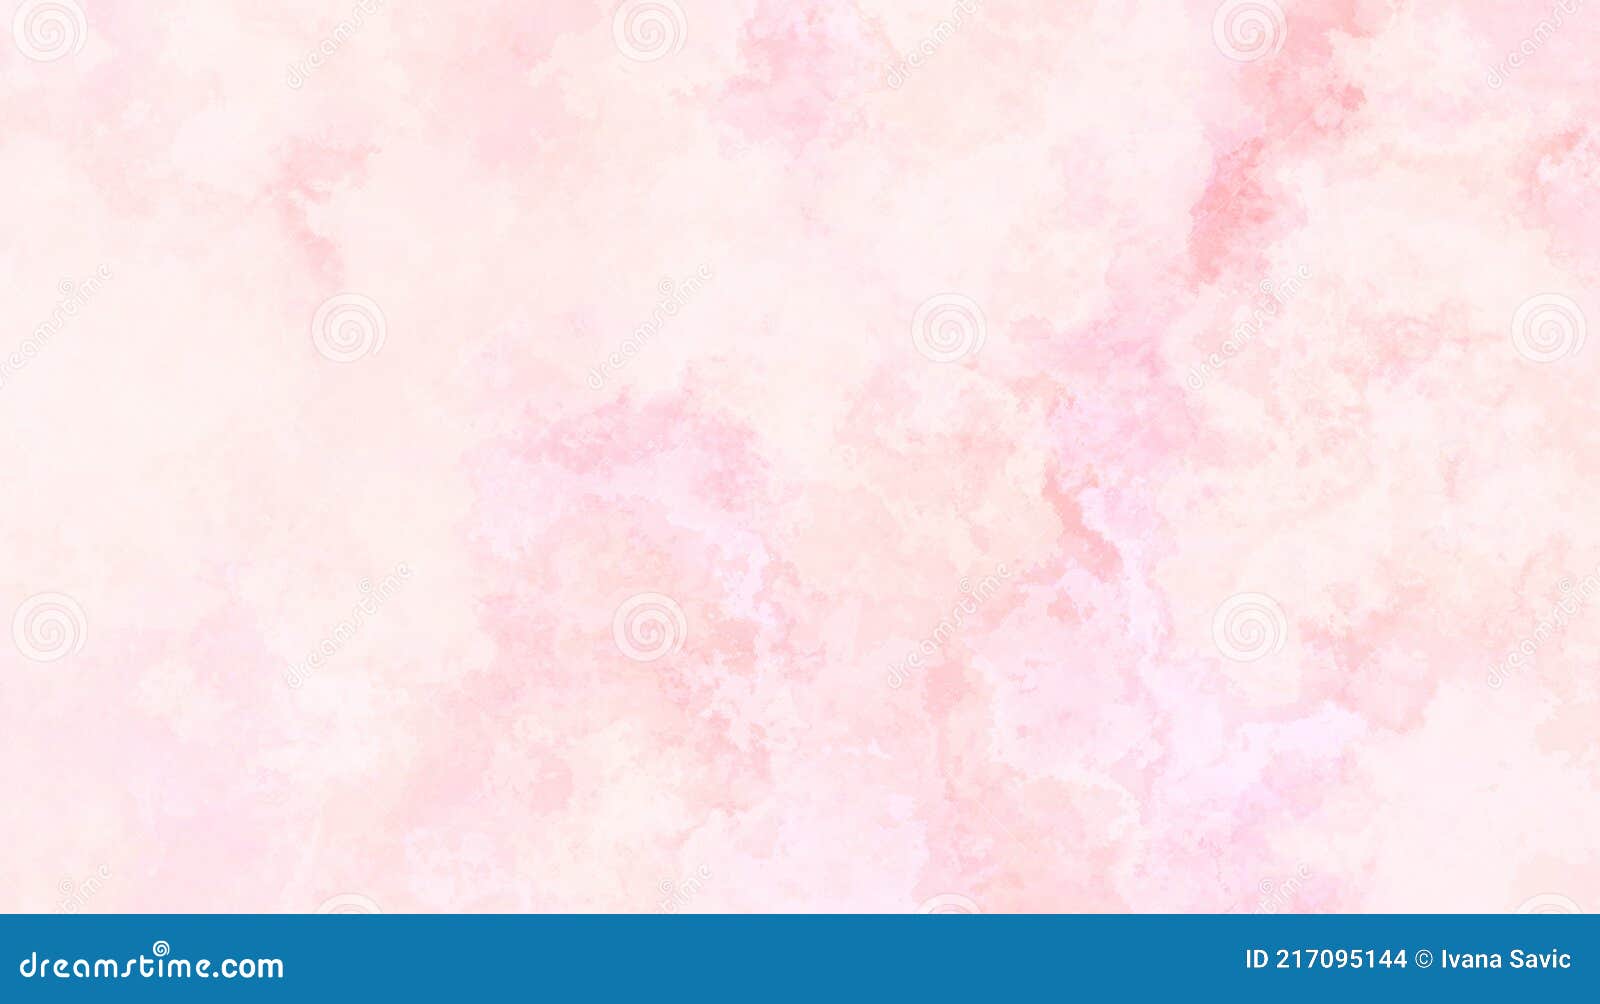 elegant pale pink marbled background with watercolor stains and vintage faint in elegant solid pink